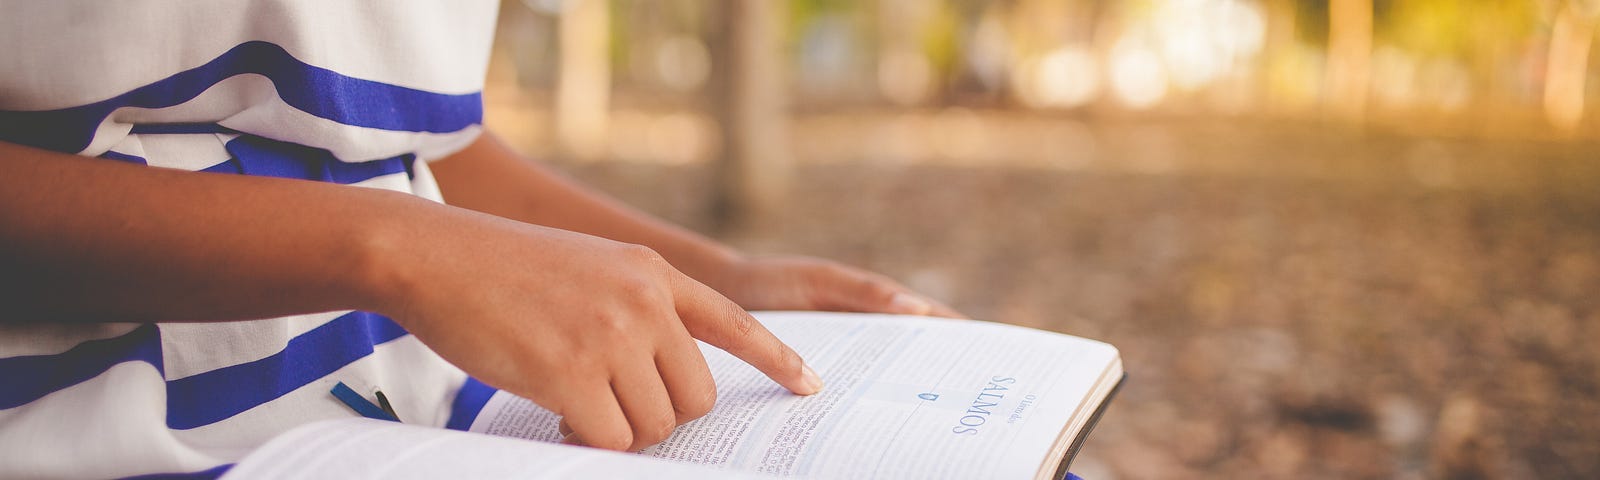 A Bible resting open on a child’s lap, as the child follows the words with their forefinger.